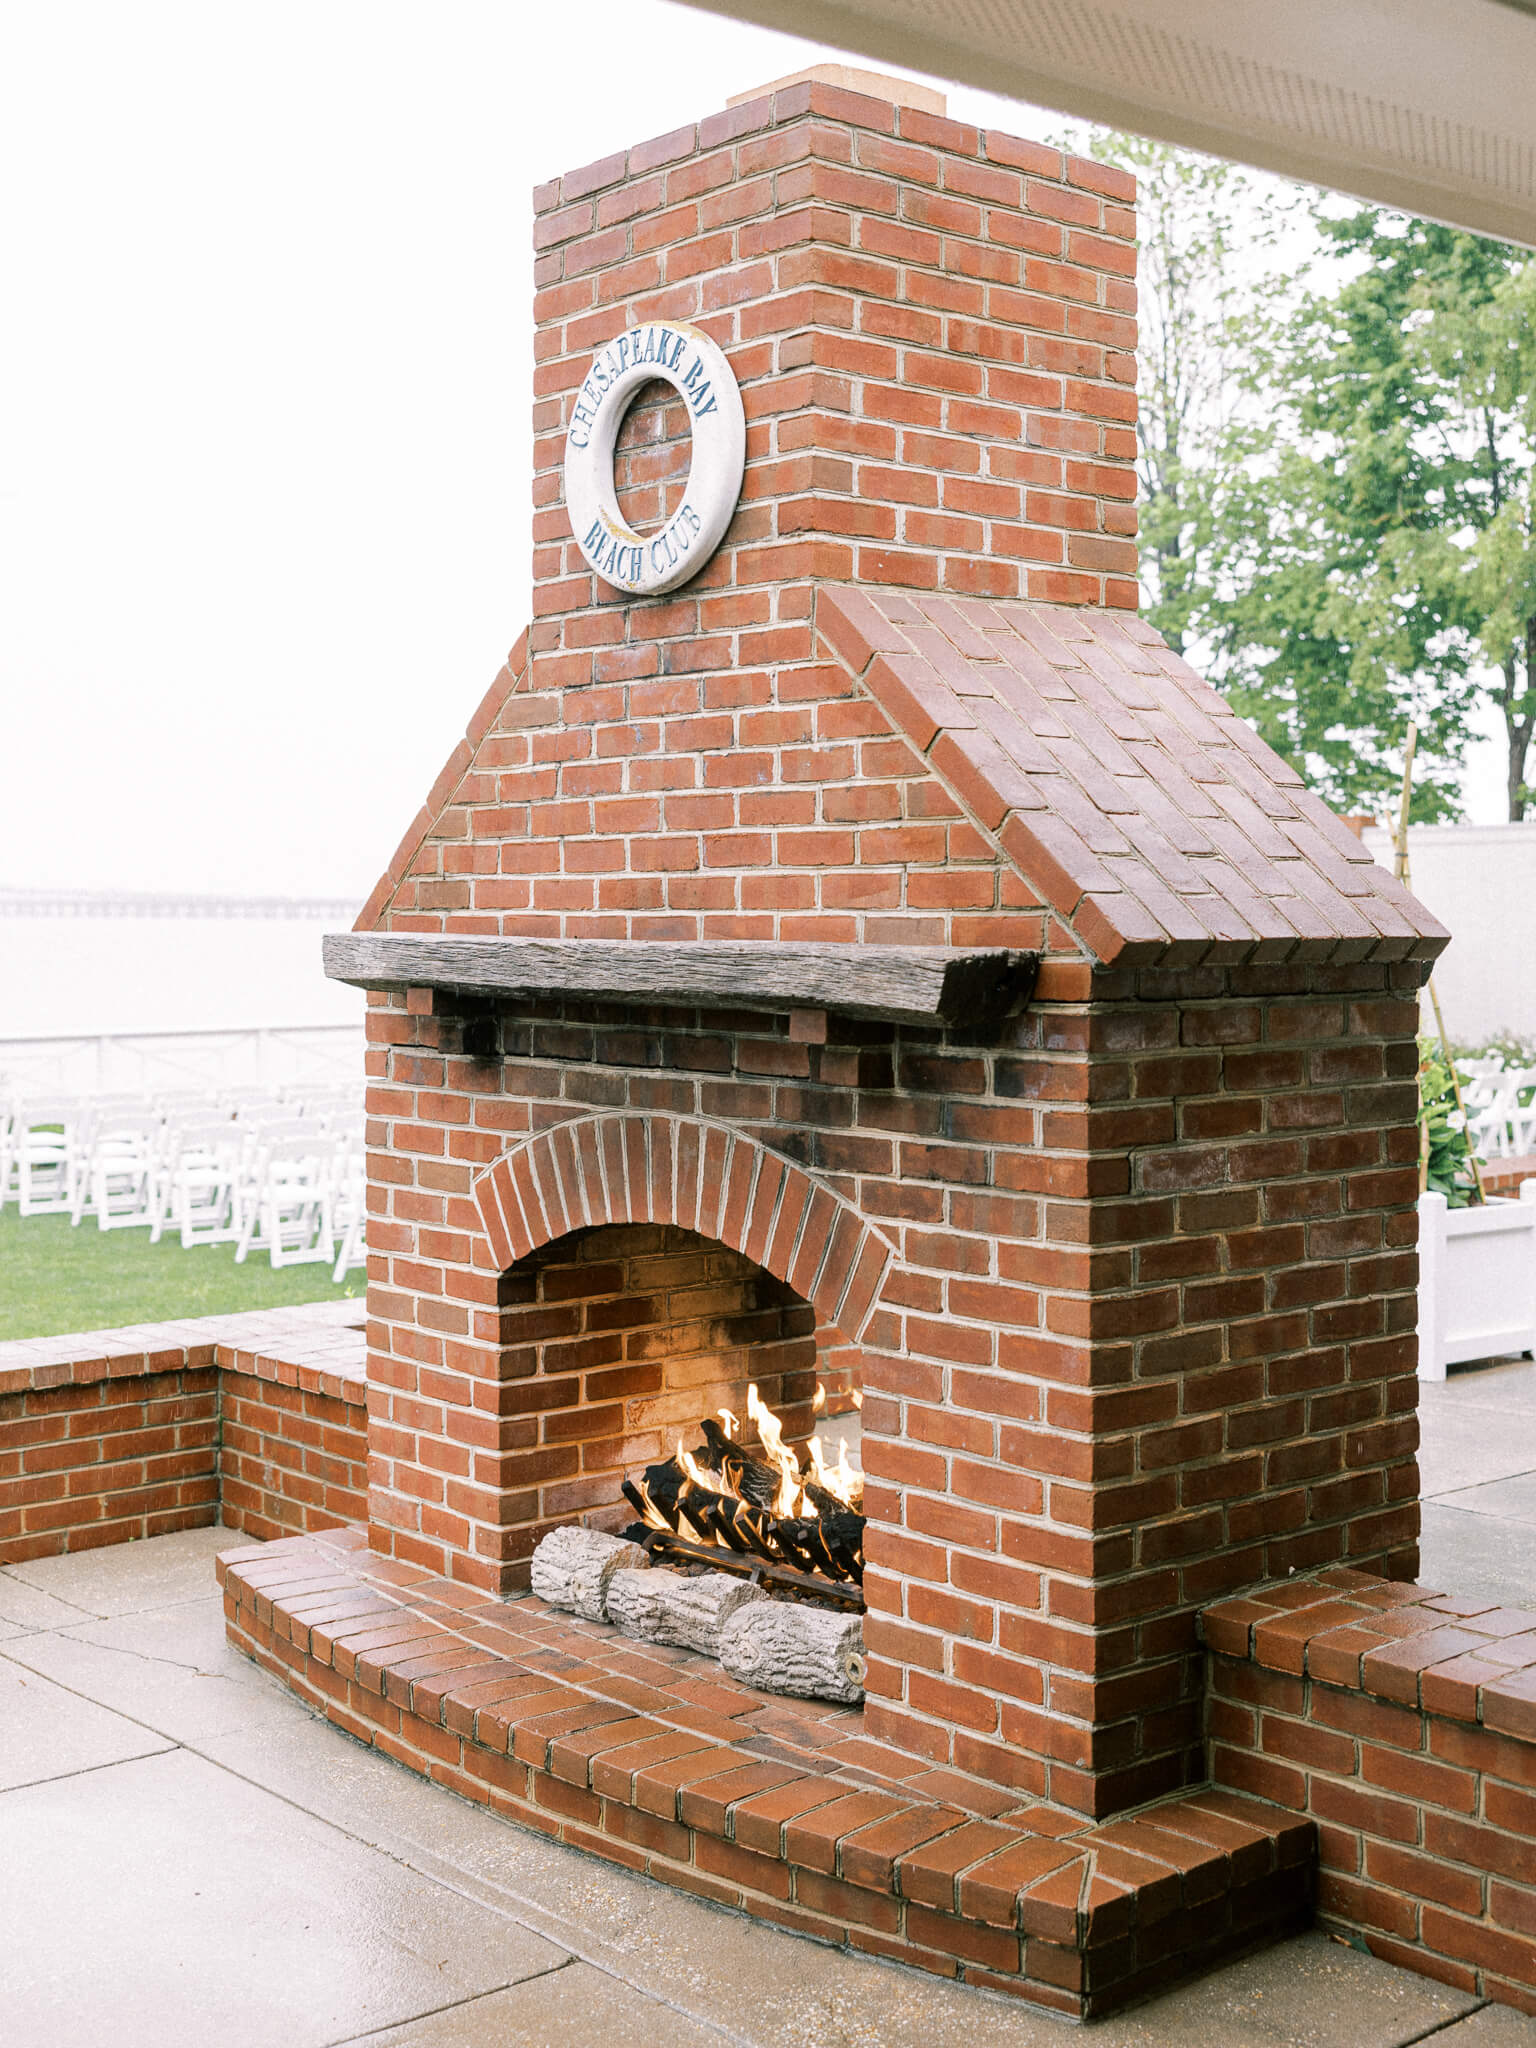 A fire in outdoor fireplace by the outdoor reception area of Chesapeake Bay Beach Club